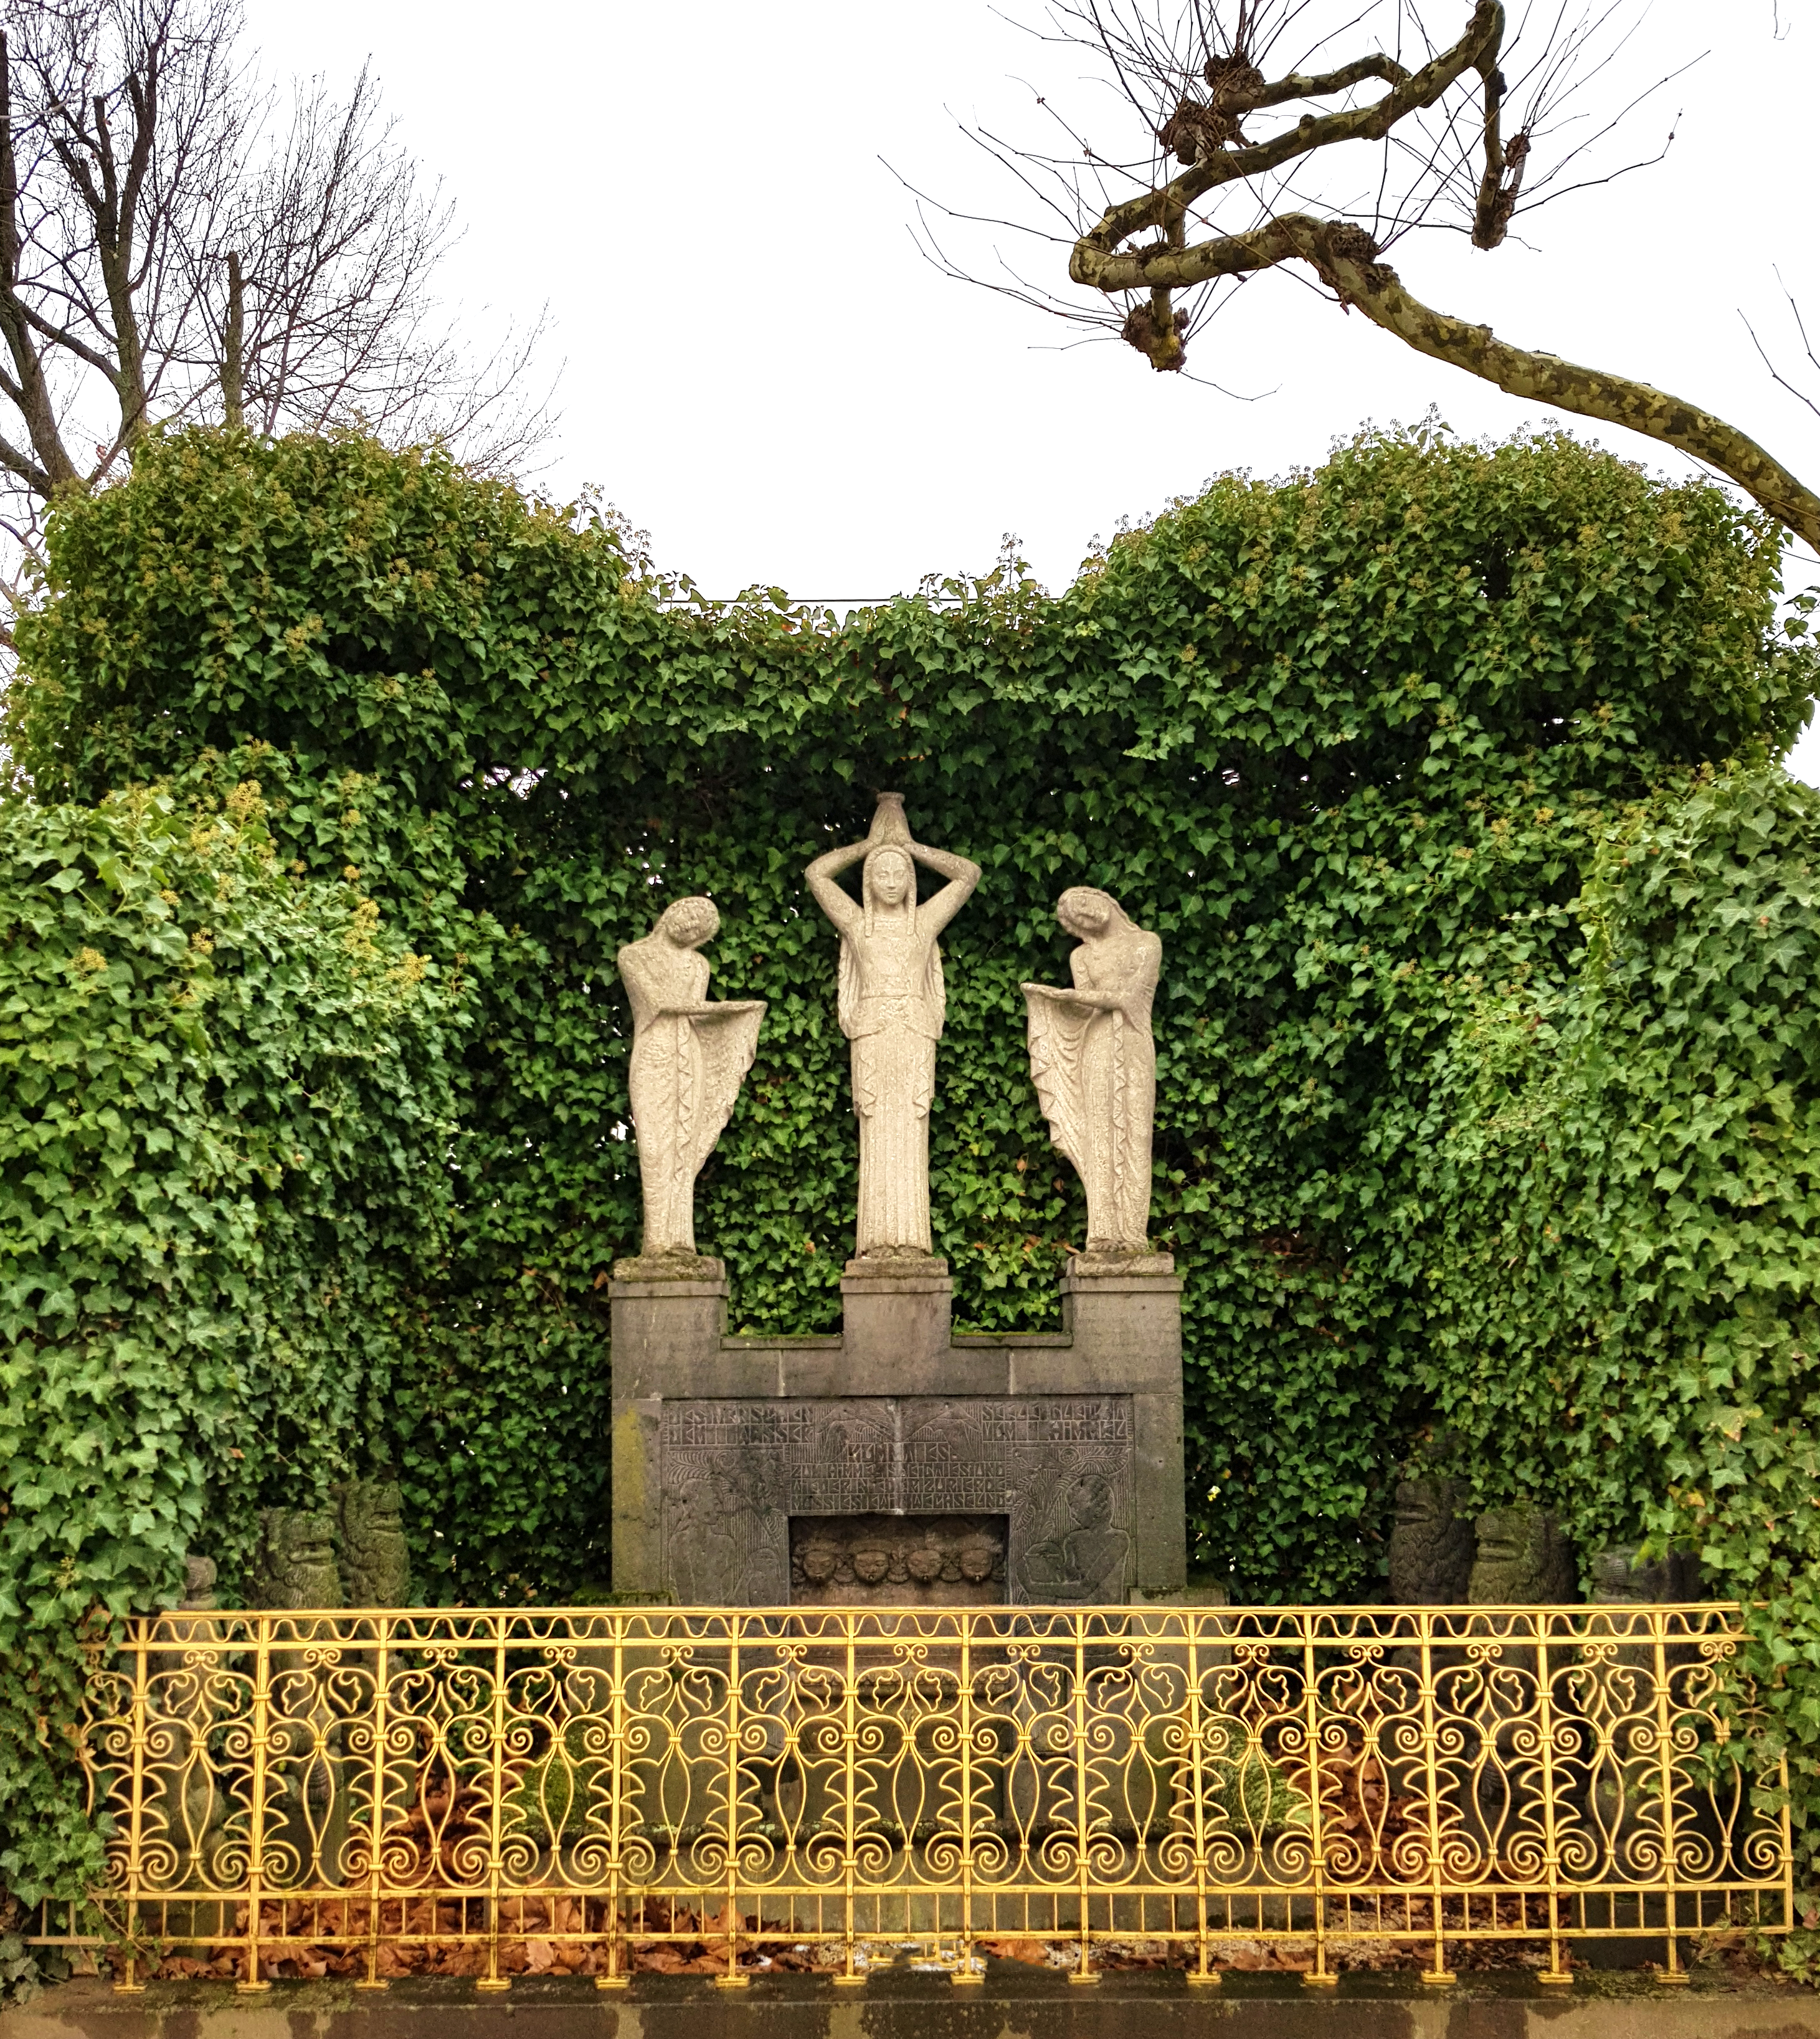 One of the statues in the park on the Mathildenhöhe. Image: Art Deco Webstore